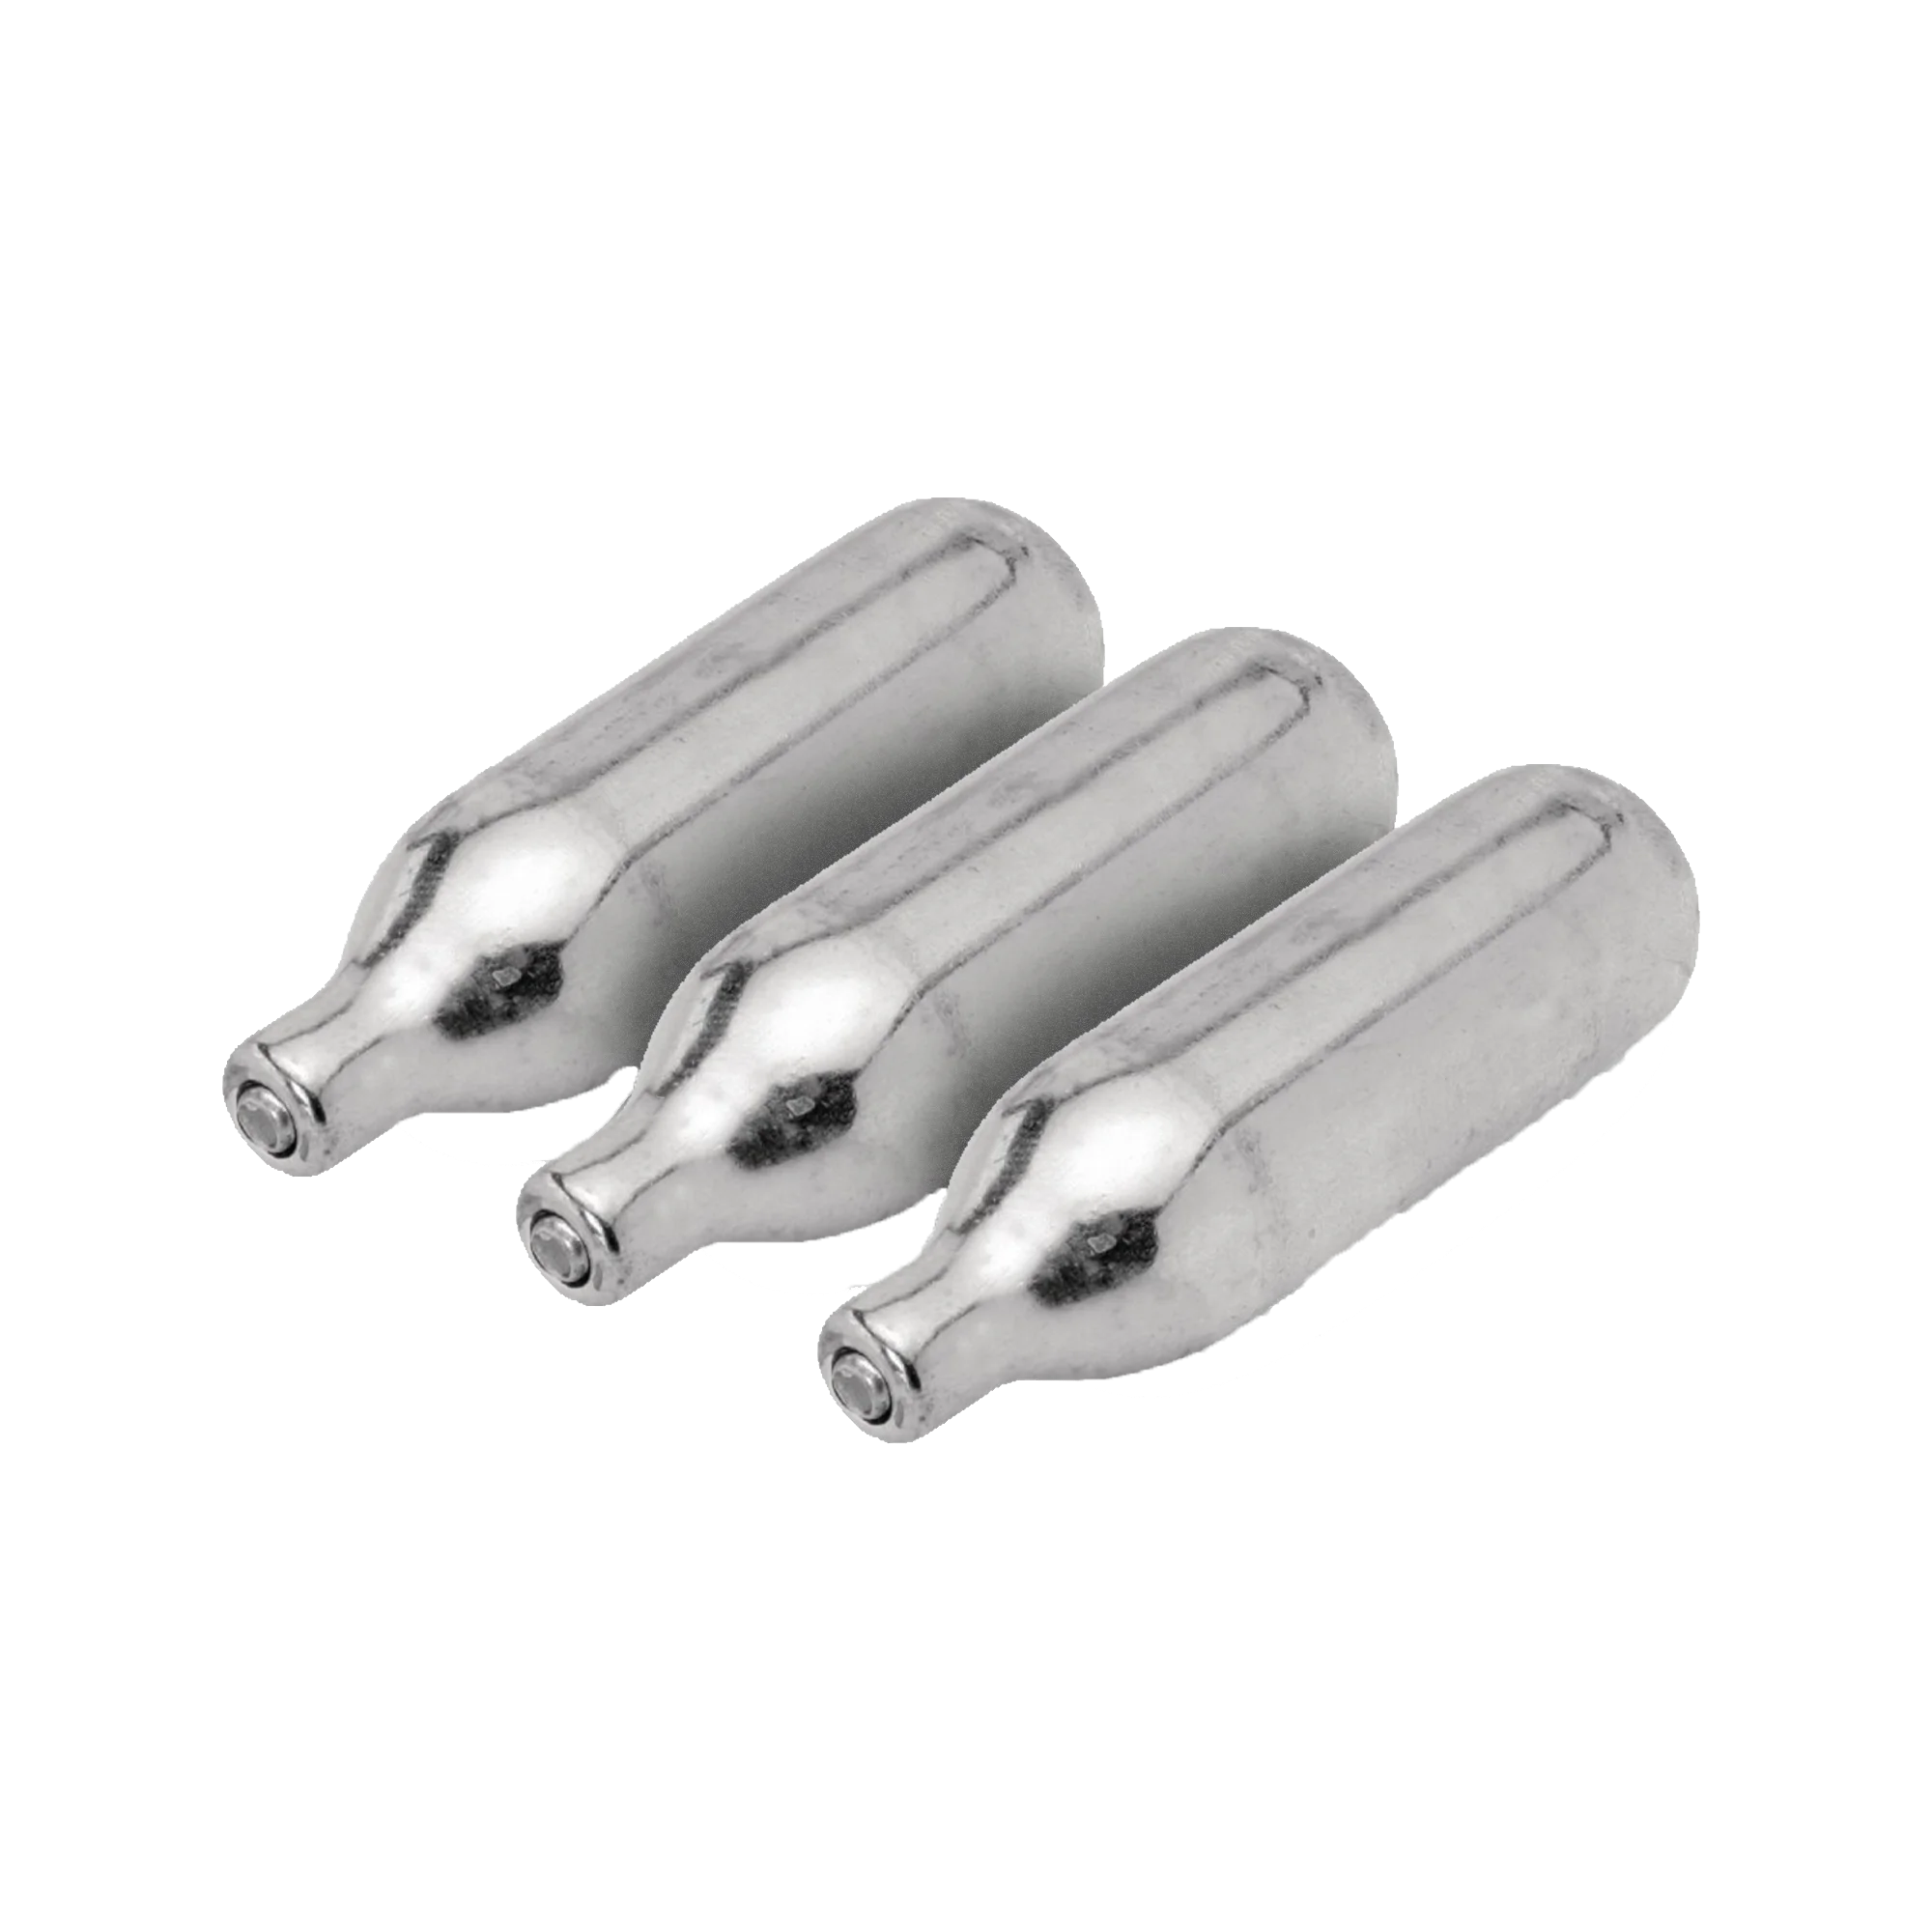 Worldwide Top Selling 8g Nitrous Oxide (N2o) Whipped Cream Chargers (62495712455)